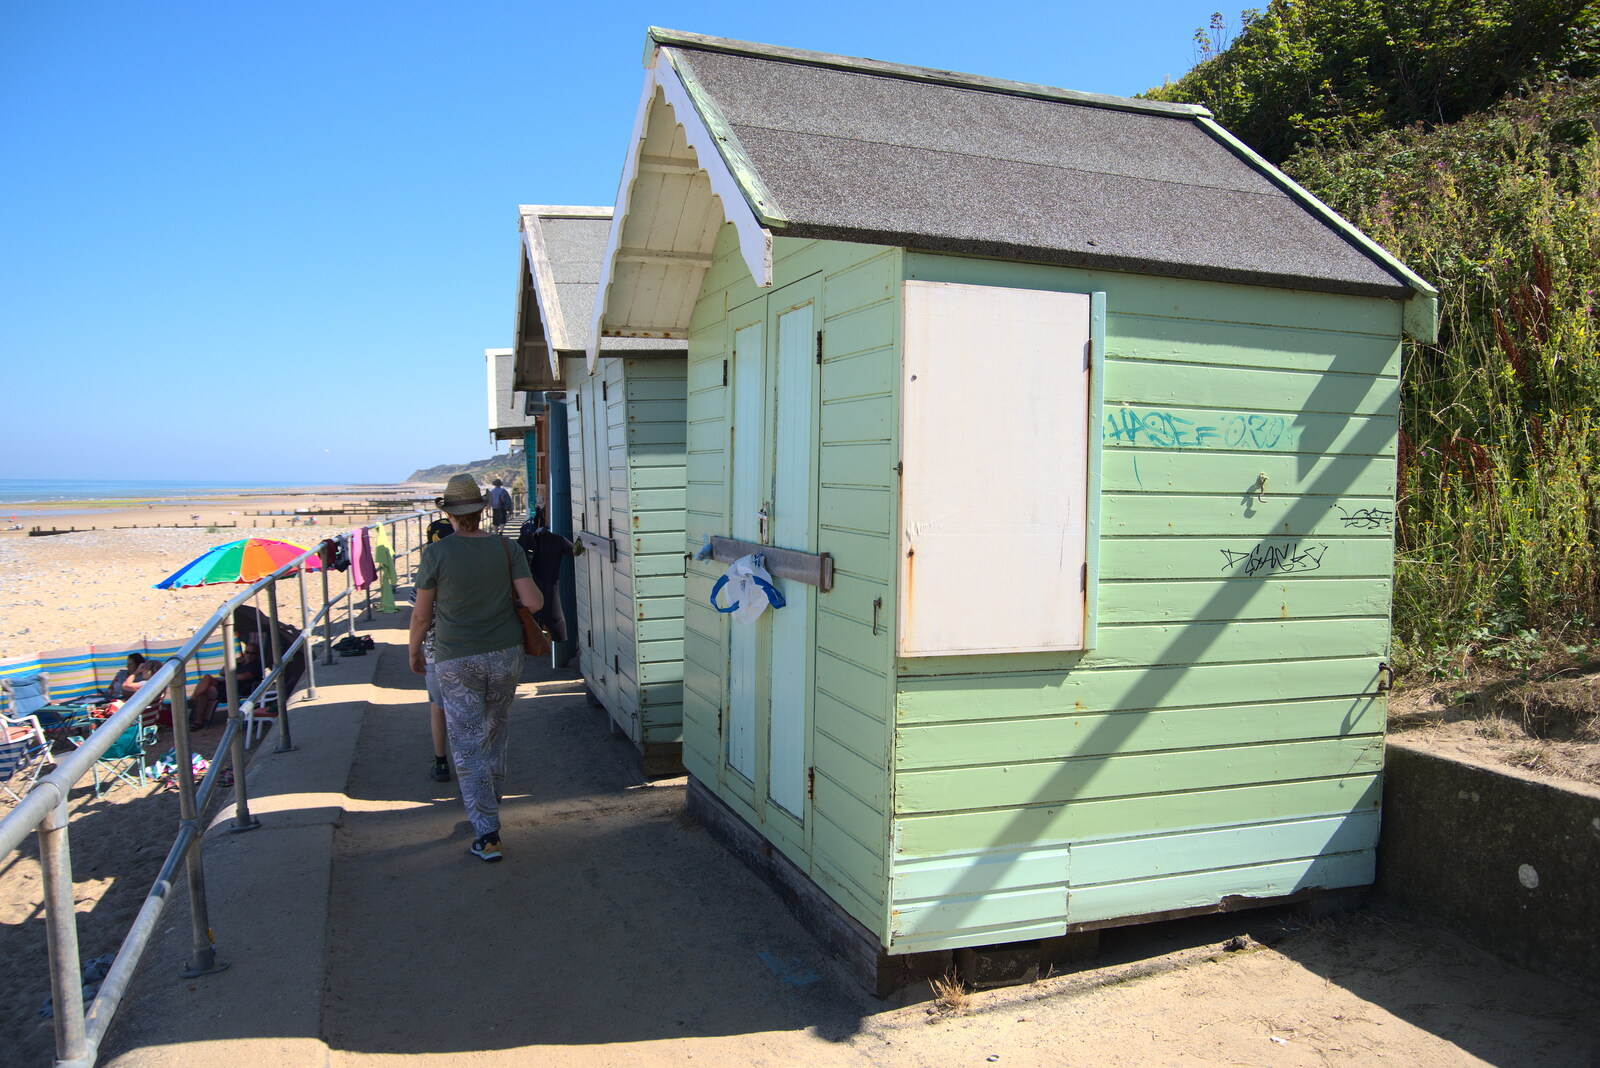 Wonky beach huts on the seafront from Camping at Forest Park, Cromer, Norfolk - 12th August 2022